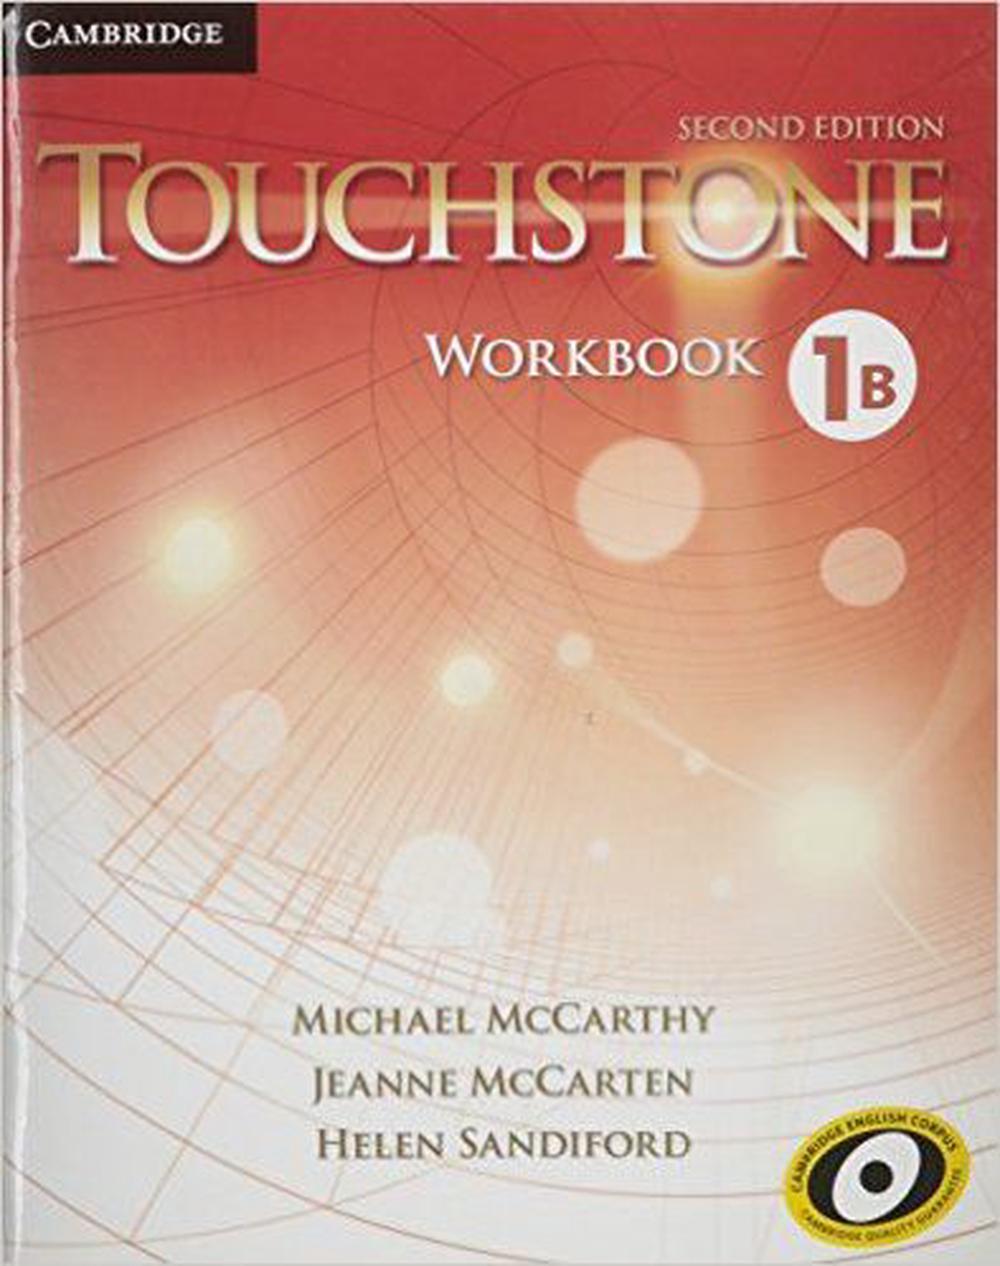 by　Nile　Paperback,　Workbook　at　Michael　B　Buy　Touchstone　online　9781107691254　Level　McCarthy,　The